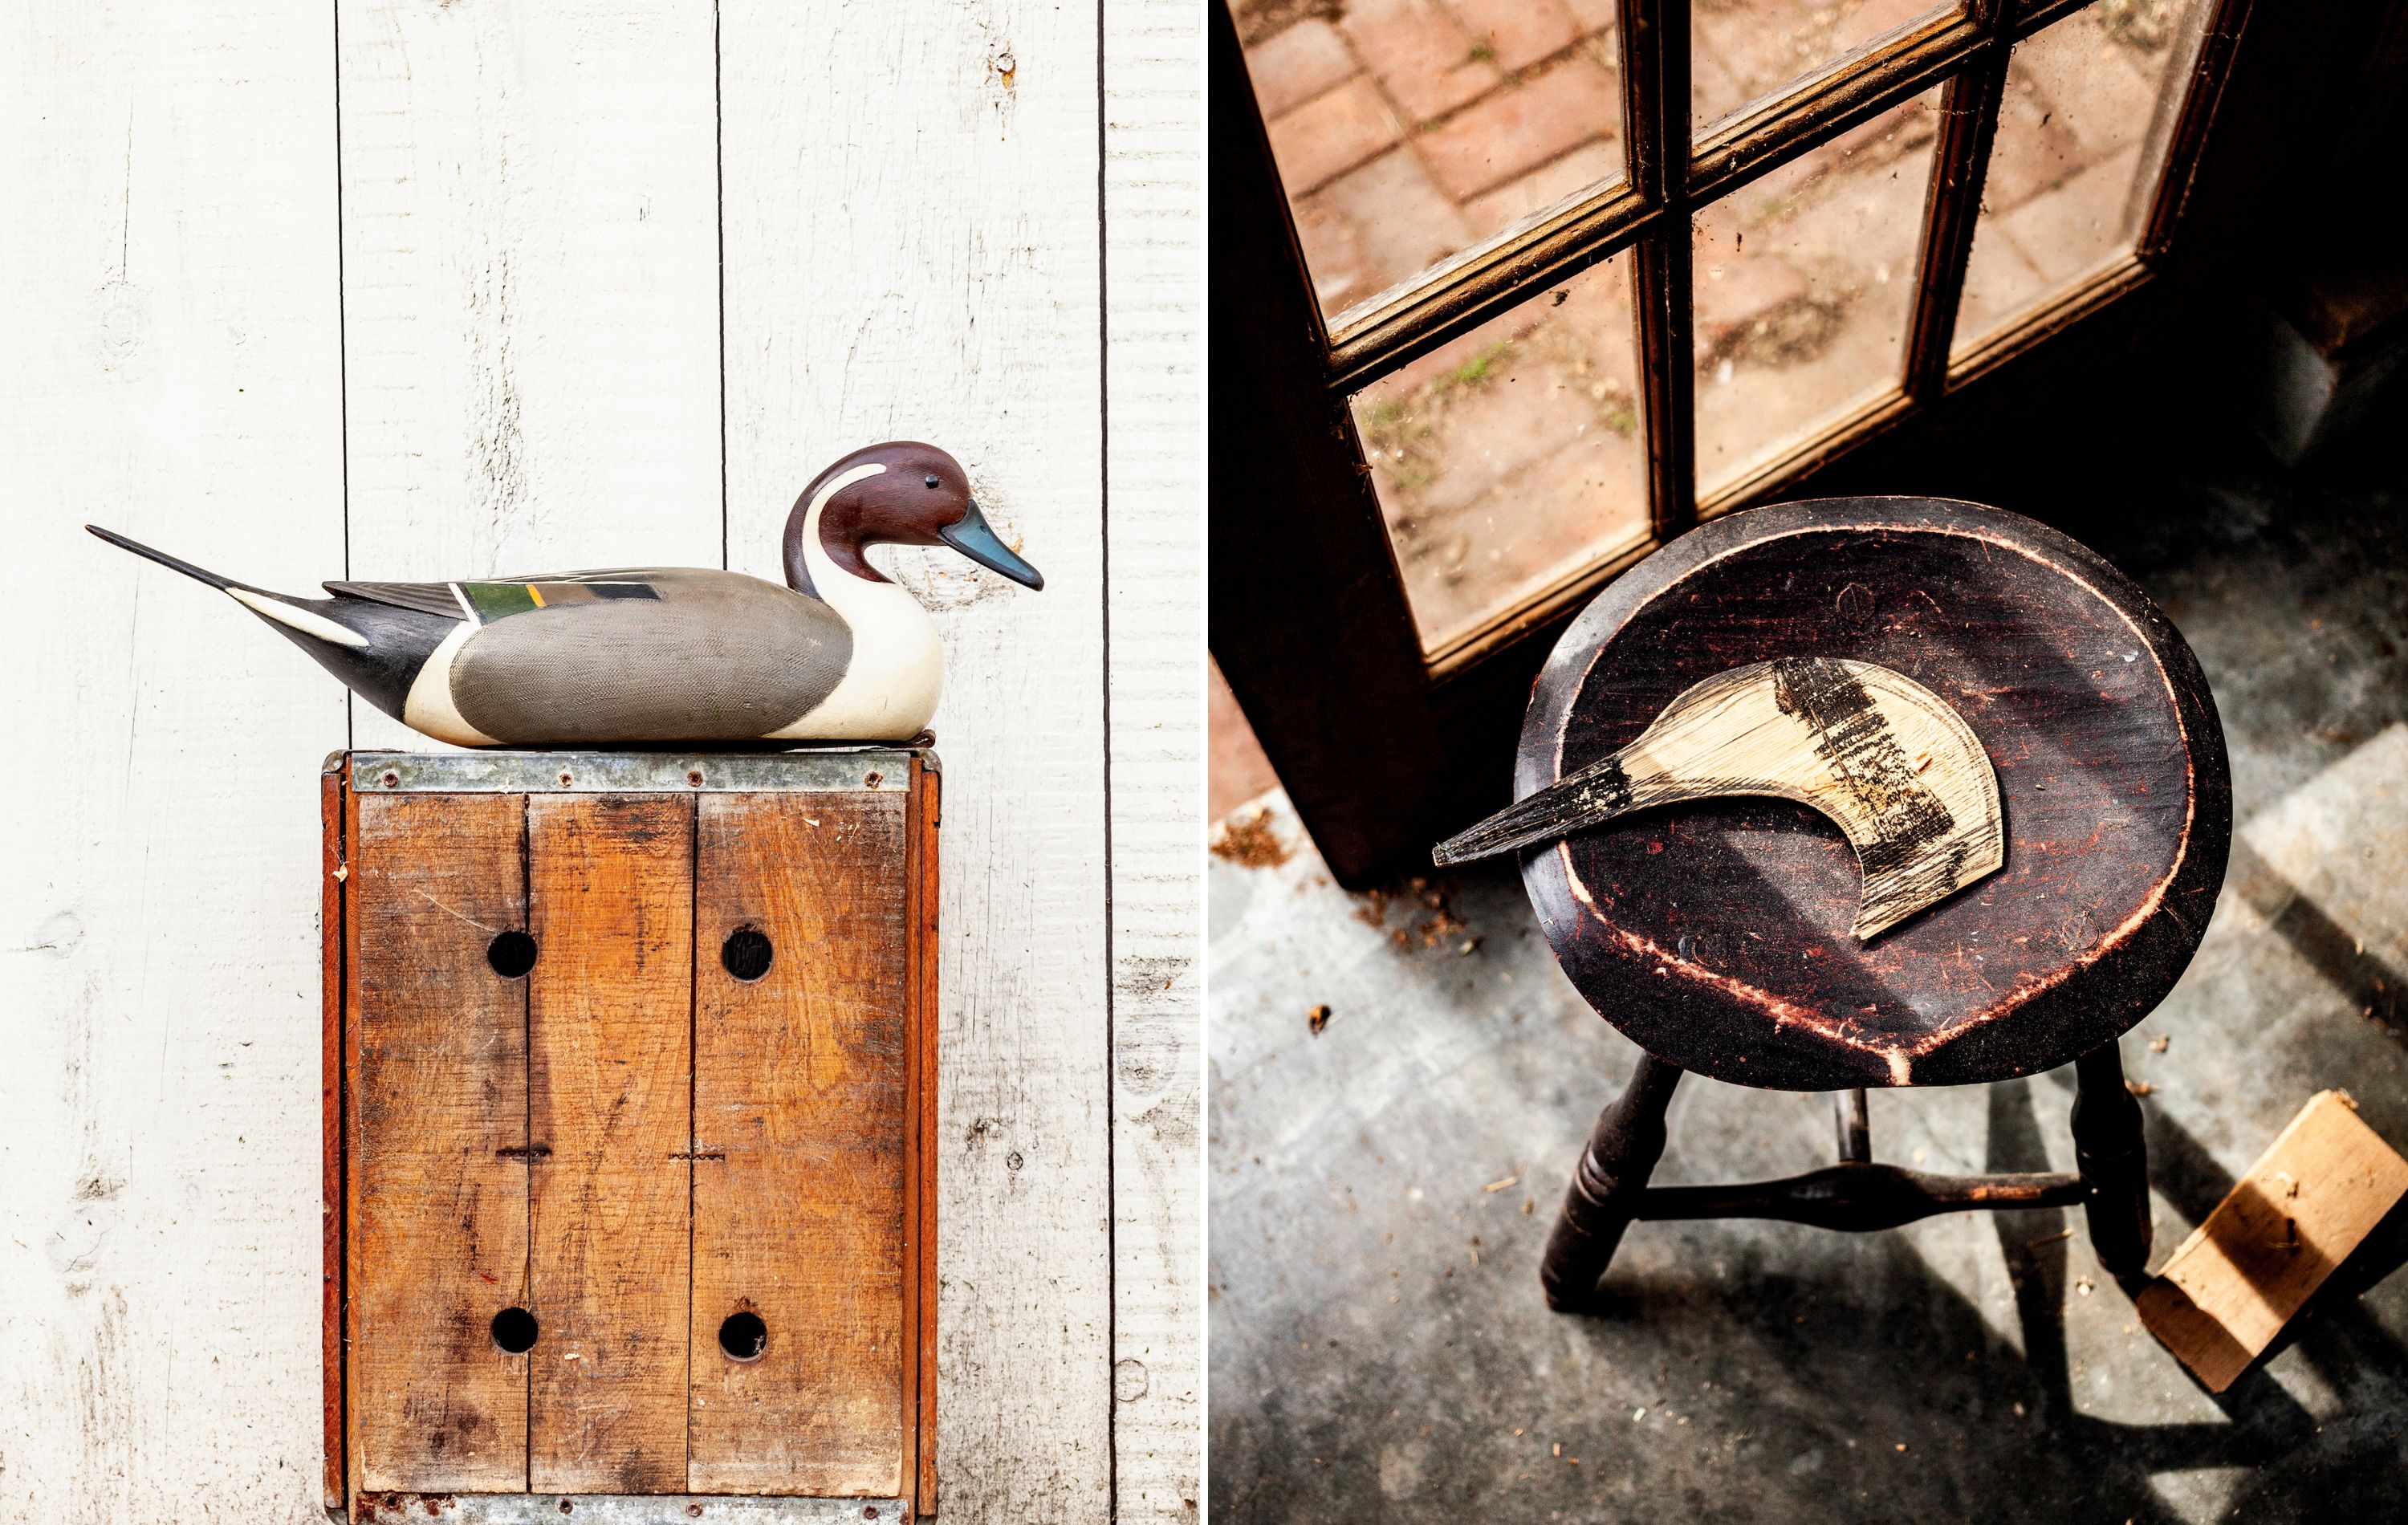 A collage of two images: a pintail decoy on a wood box; a duck head cut-out on a stool by a window.